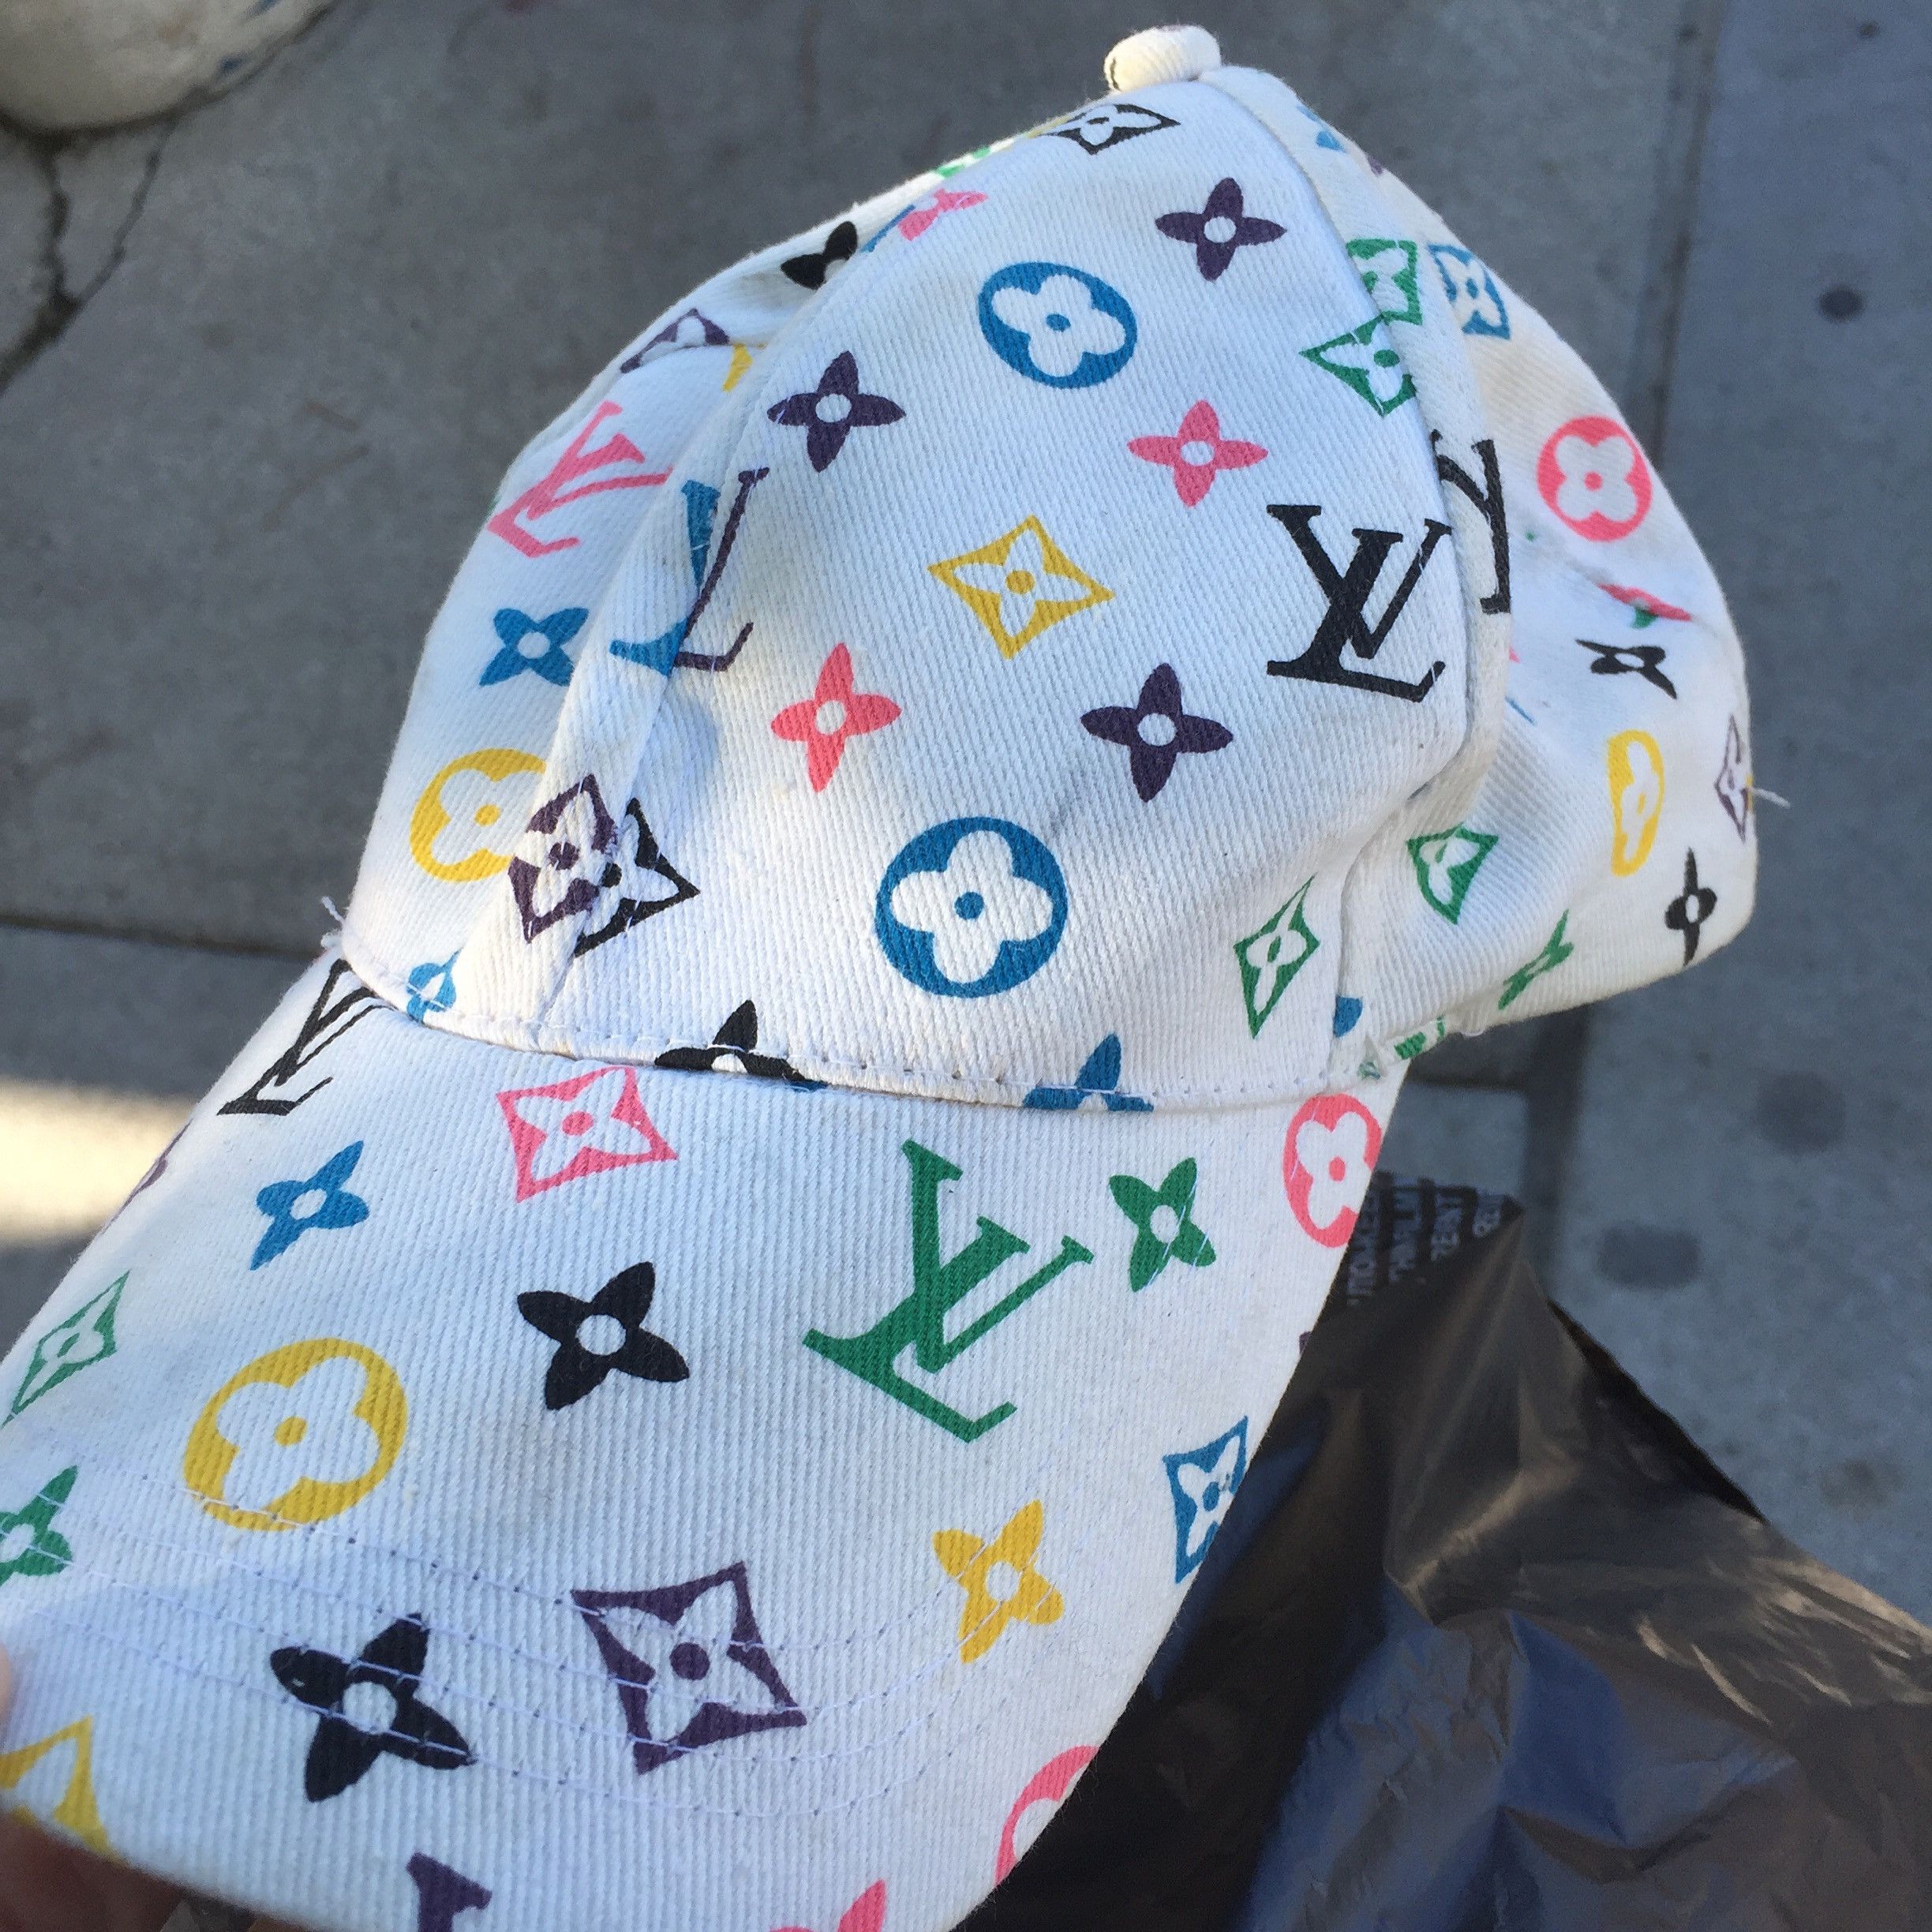 Louis Vuitton Baseball Caps in Central Division for sale ▷ Prices